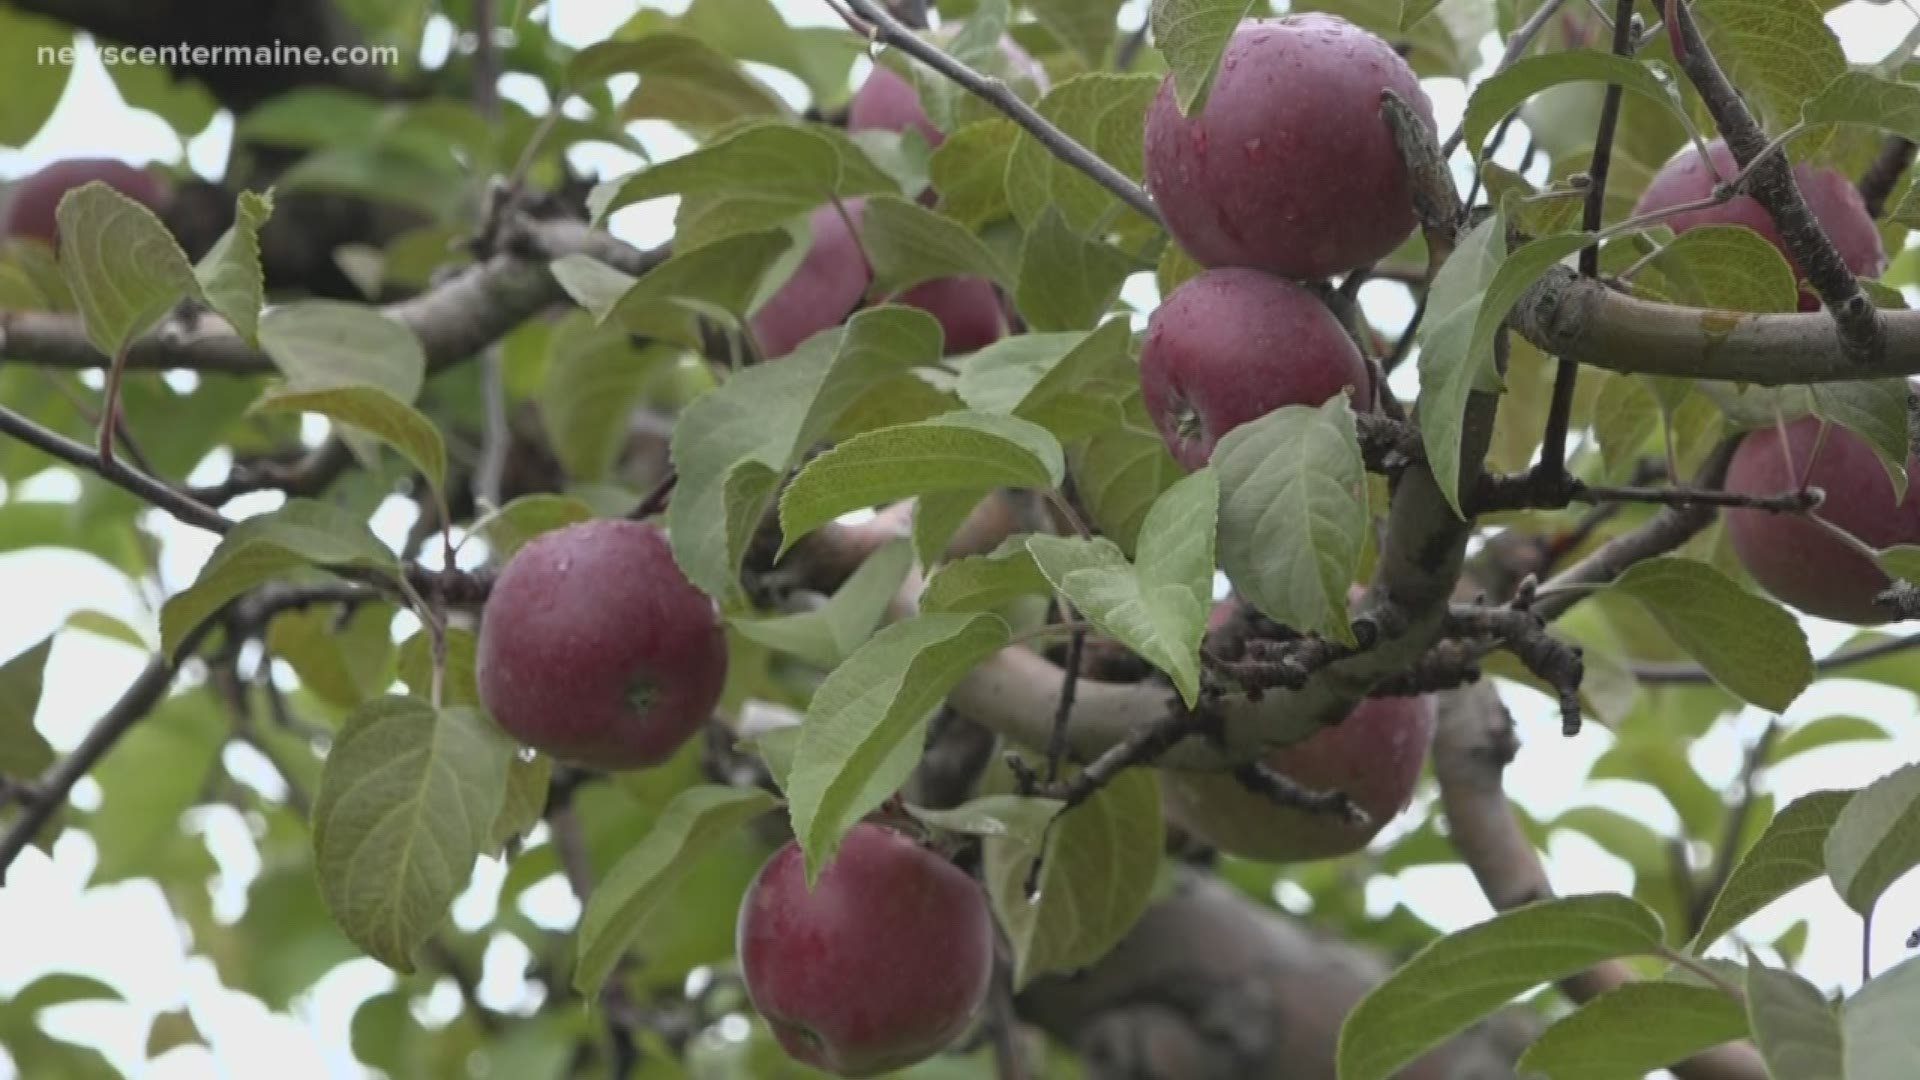 Hundreds of apple orchards are open as the apple picking season is at its peak.